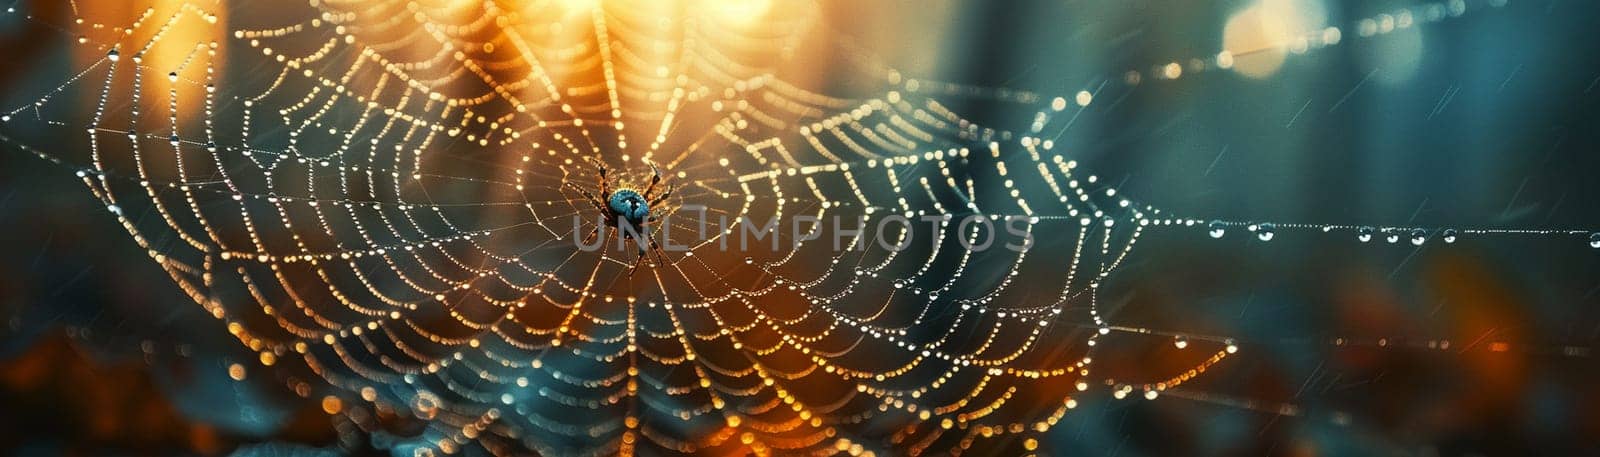 Morning dew on a spider web by Benzoix